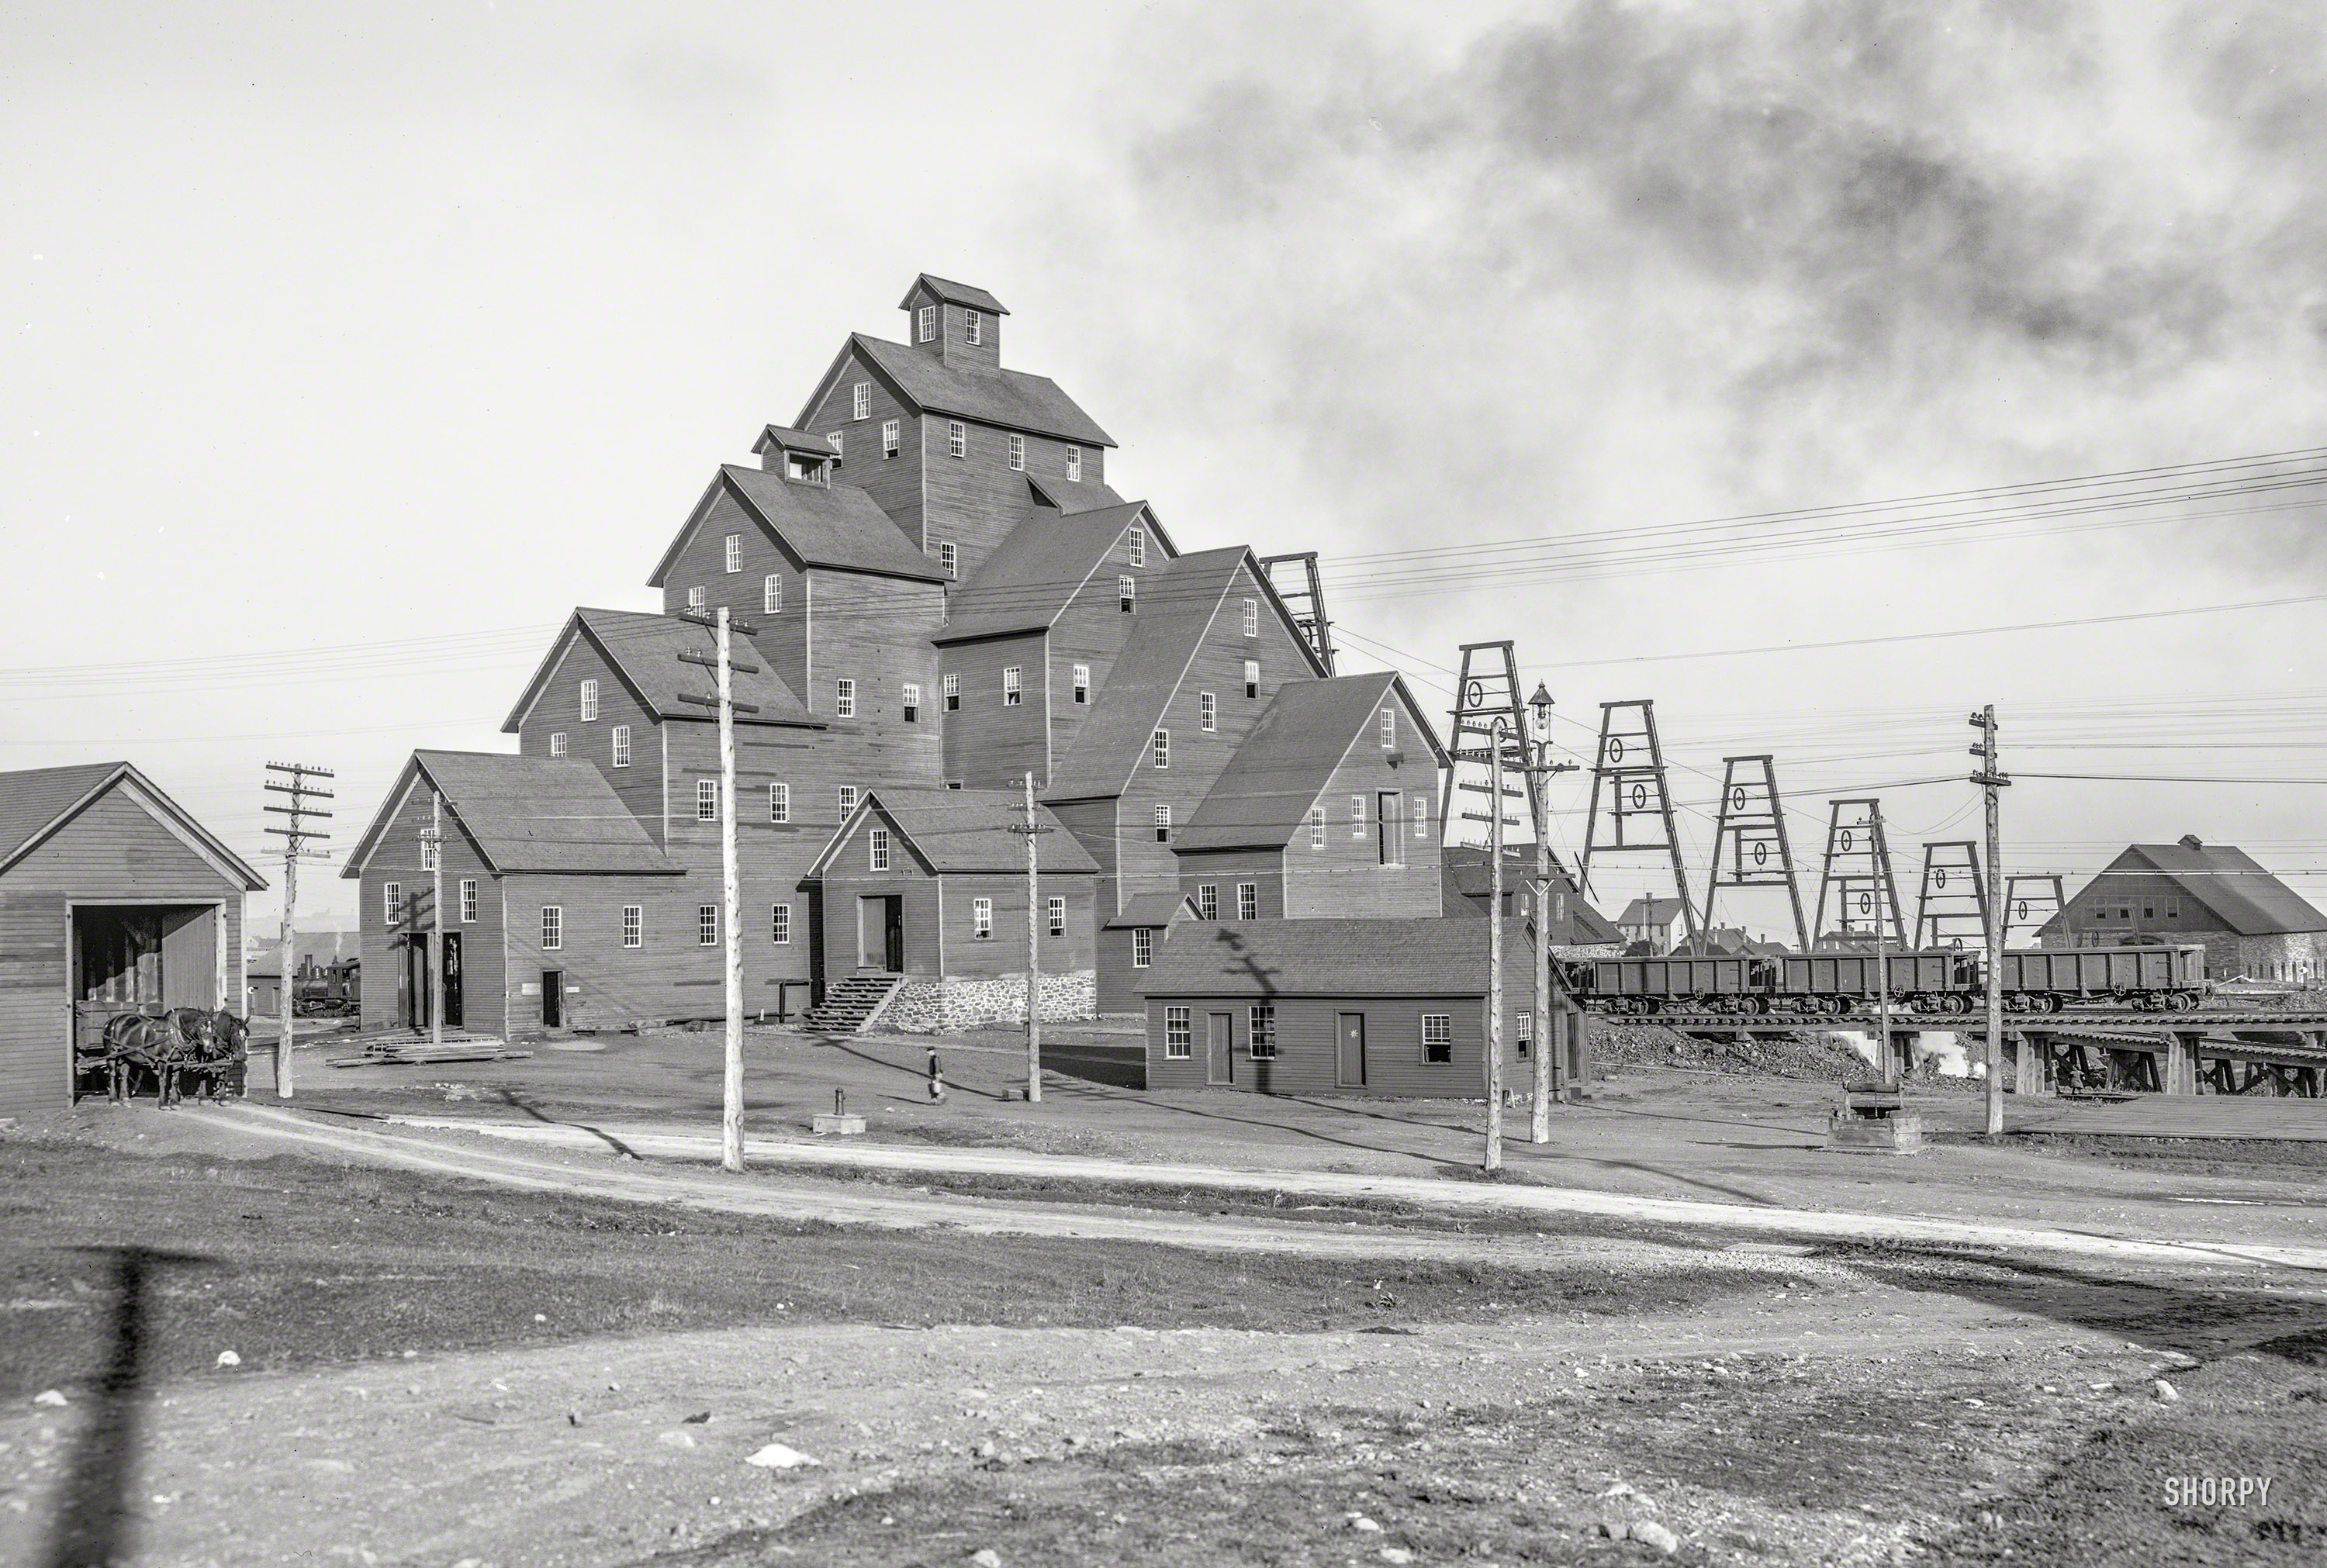 1906. "Shaft No. 2, Quincy copper mine, Hancock, Michigan." Whatever is going on in there, we're glad we don't have to wash the windows. View full size.